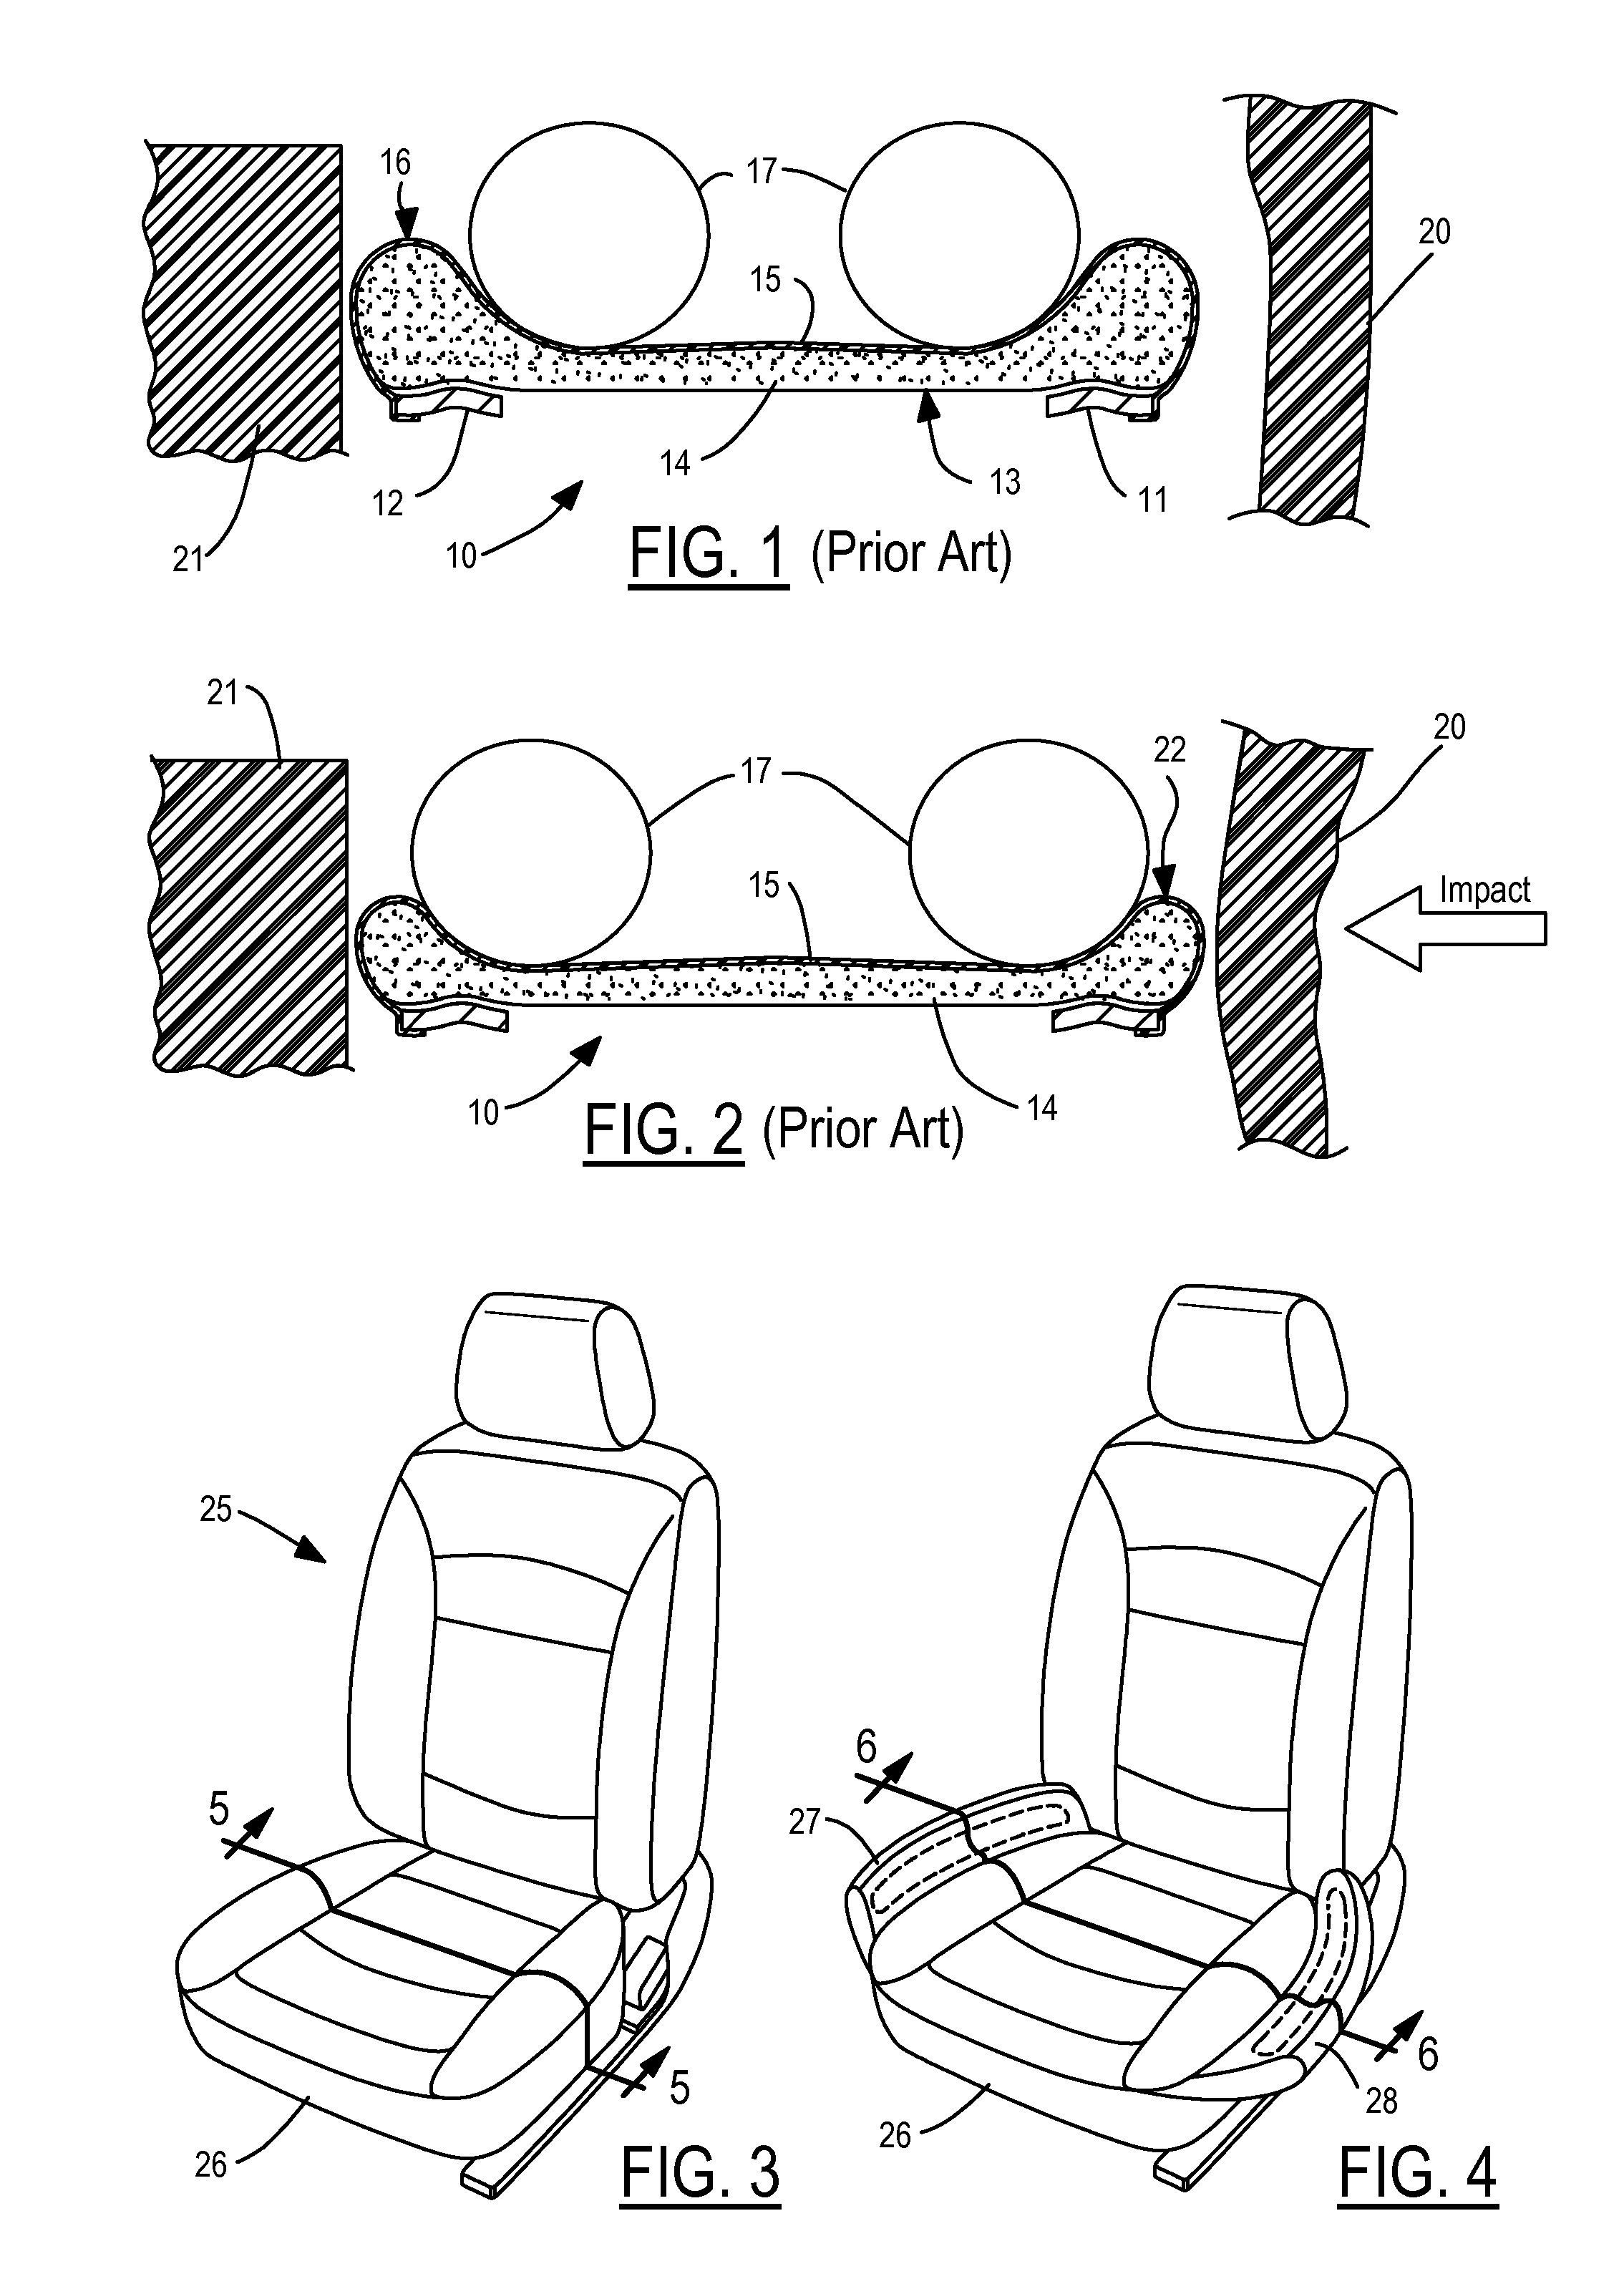 Active bolster deployed from vehicle seat